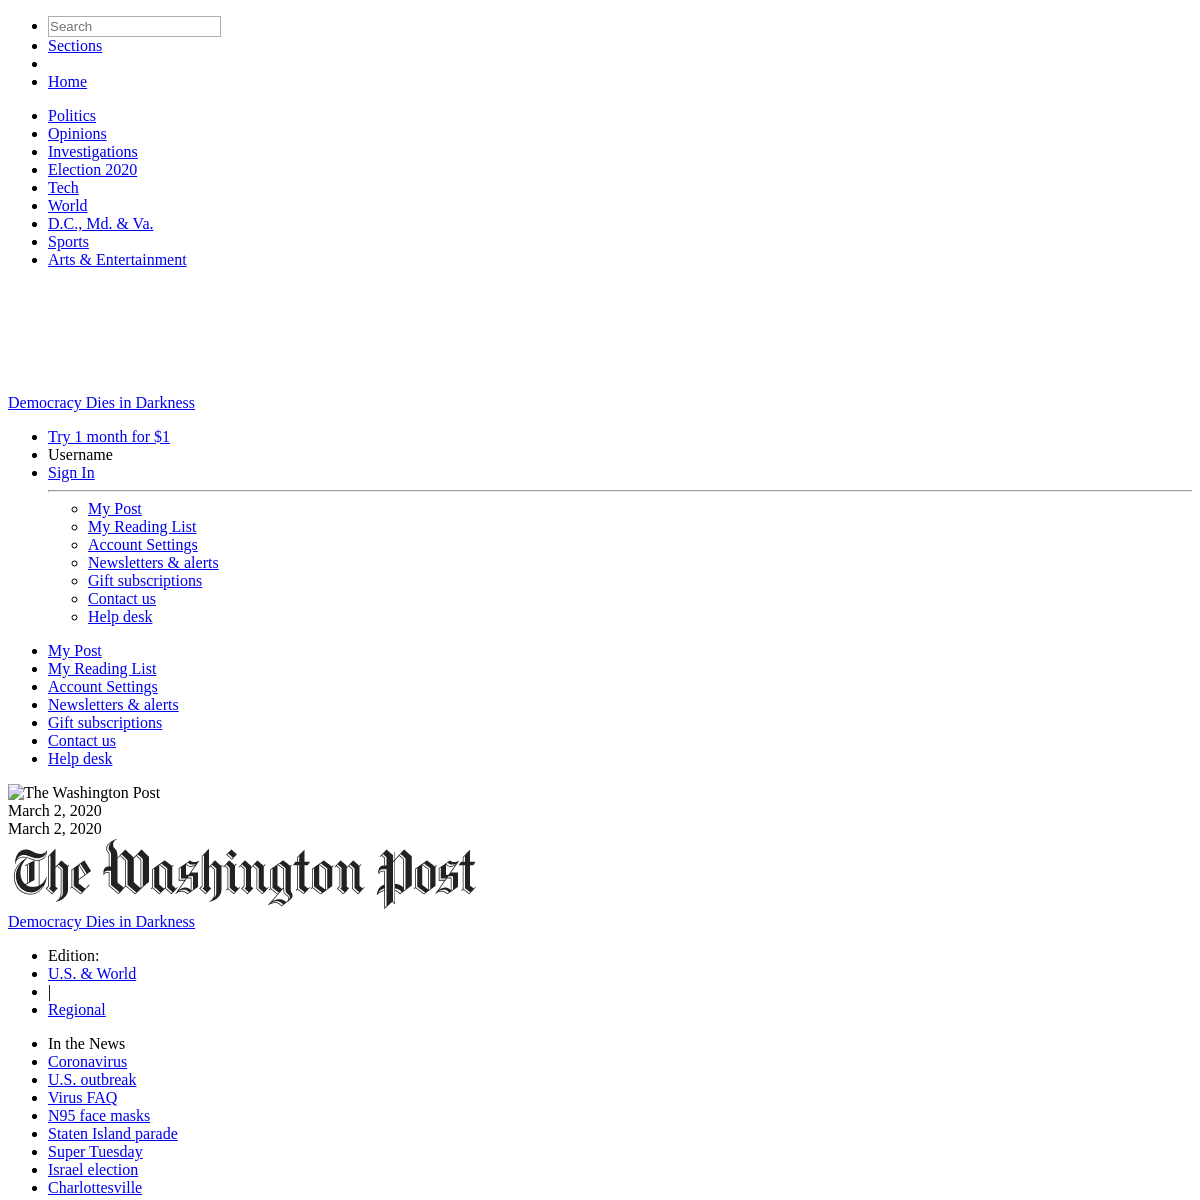 A complete backup of www.washingtonpost.com/politics/2020/03/02/is-it-legal-fire-an-employee-his-political-views-what-if-he-were